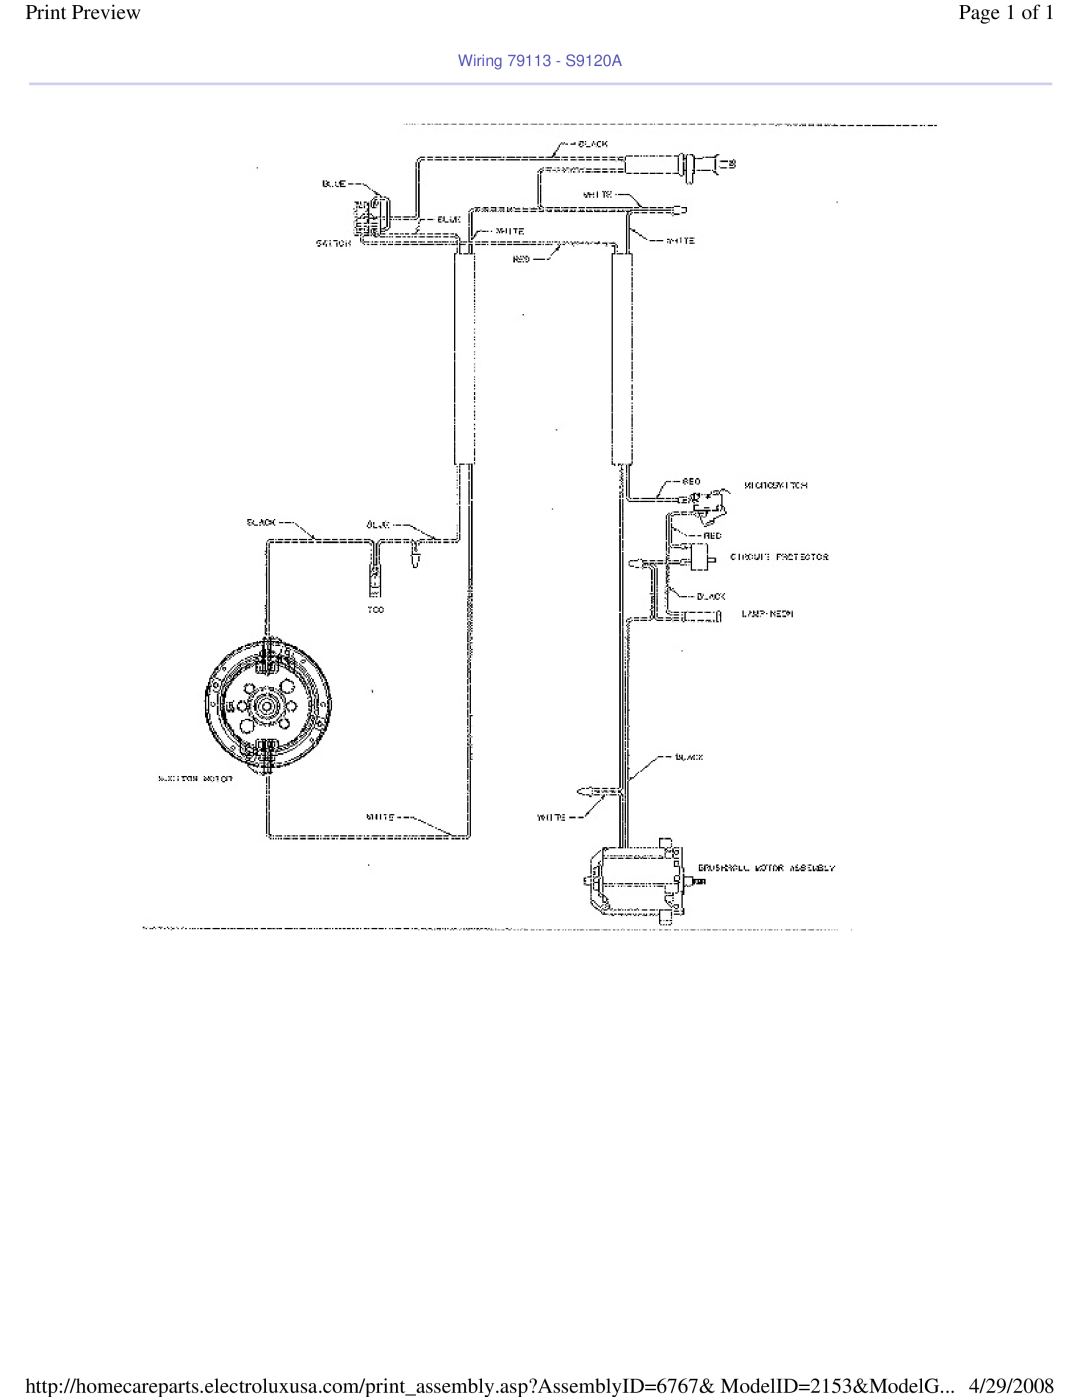 Sanitaire manual Wiring 79113 - S9120A, Print Preview, Page 1 of 